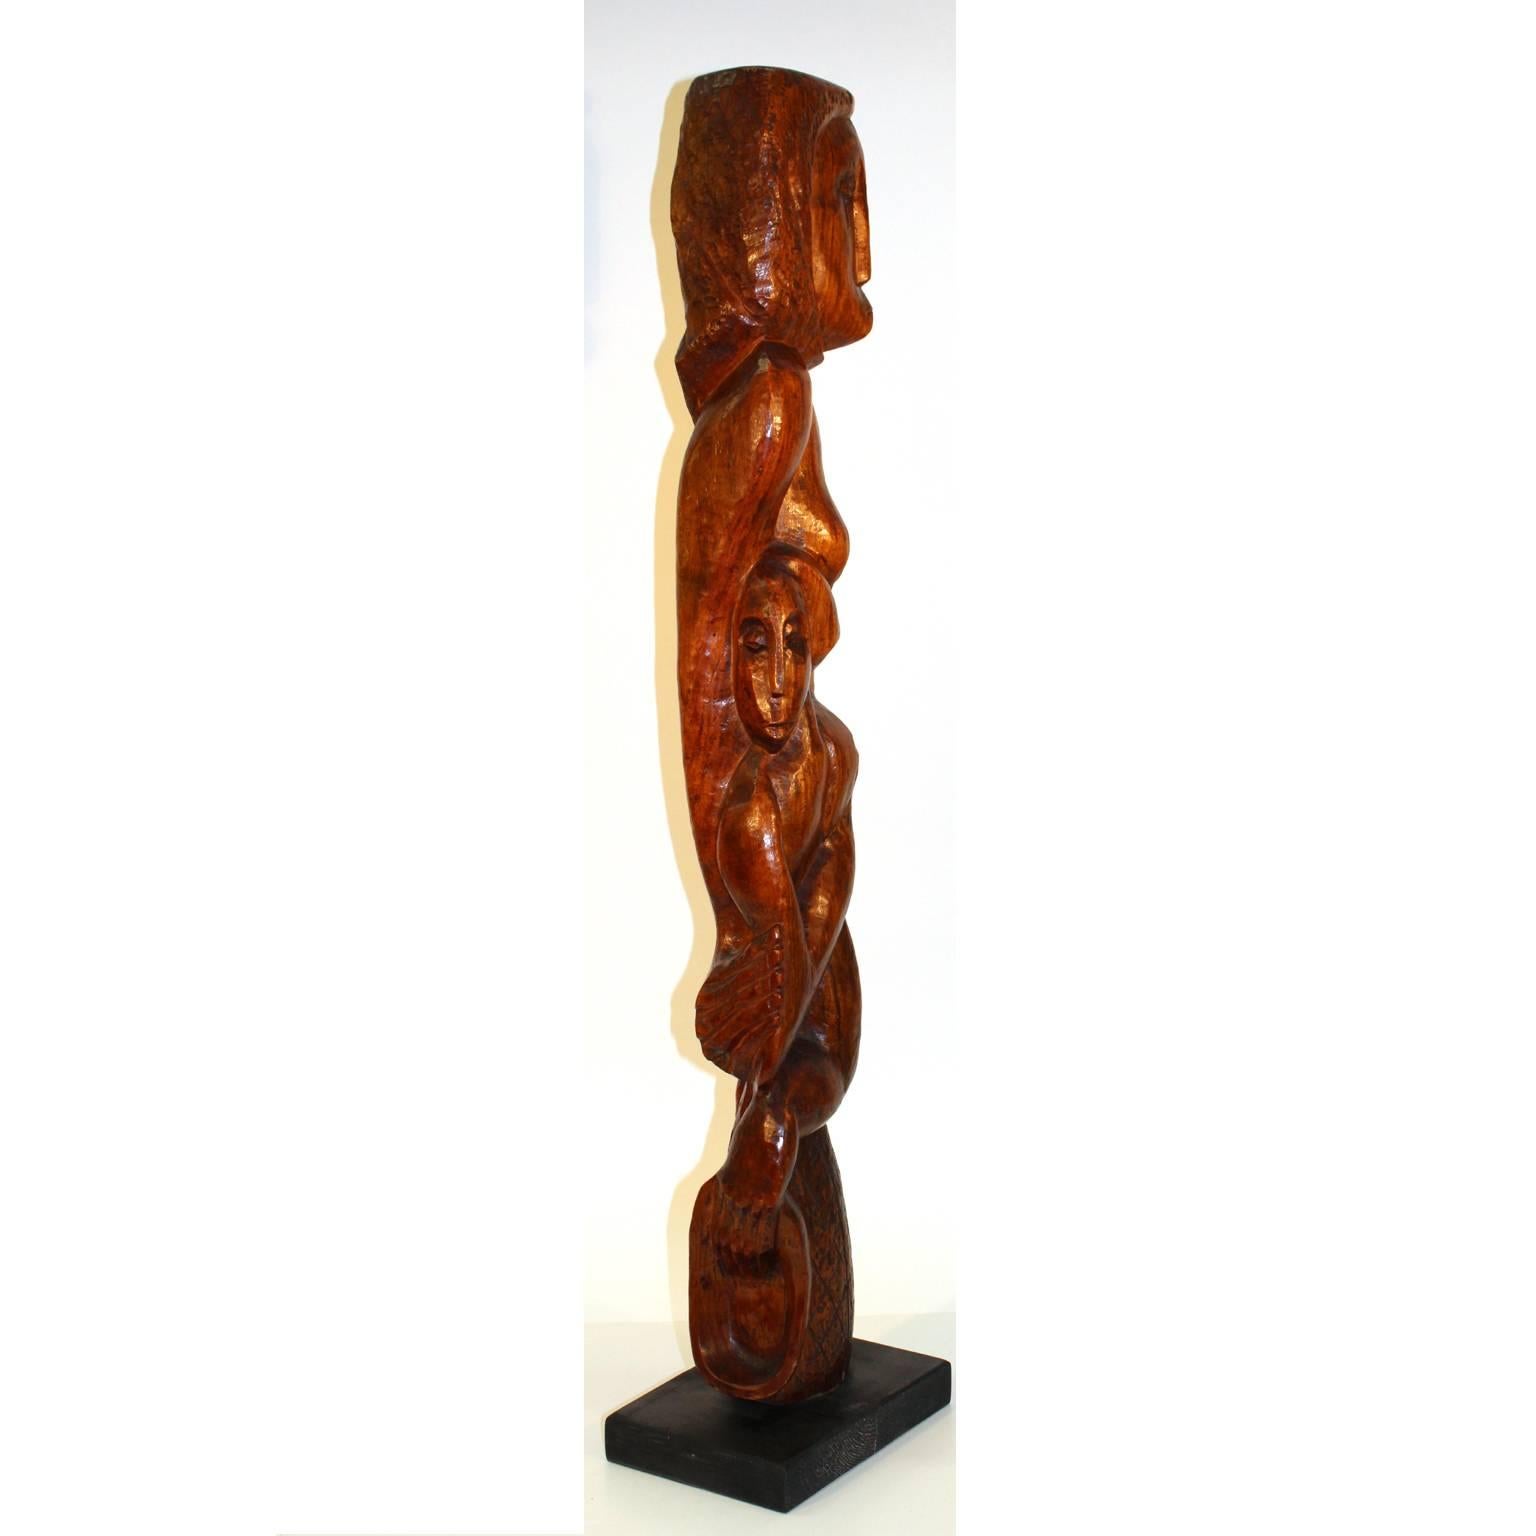 An African School carved wood sculpture made in the 1940s (circa 1940) by U.S. artist Clara Shainess and mounted on a painted wooden base. Good condition, some age cracks and chips; signed 'Shainess' in wood.